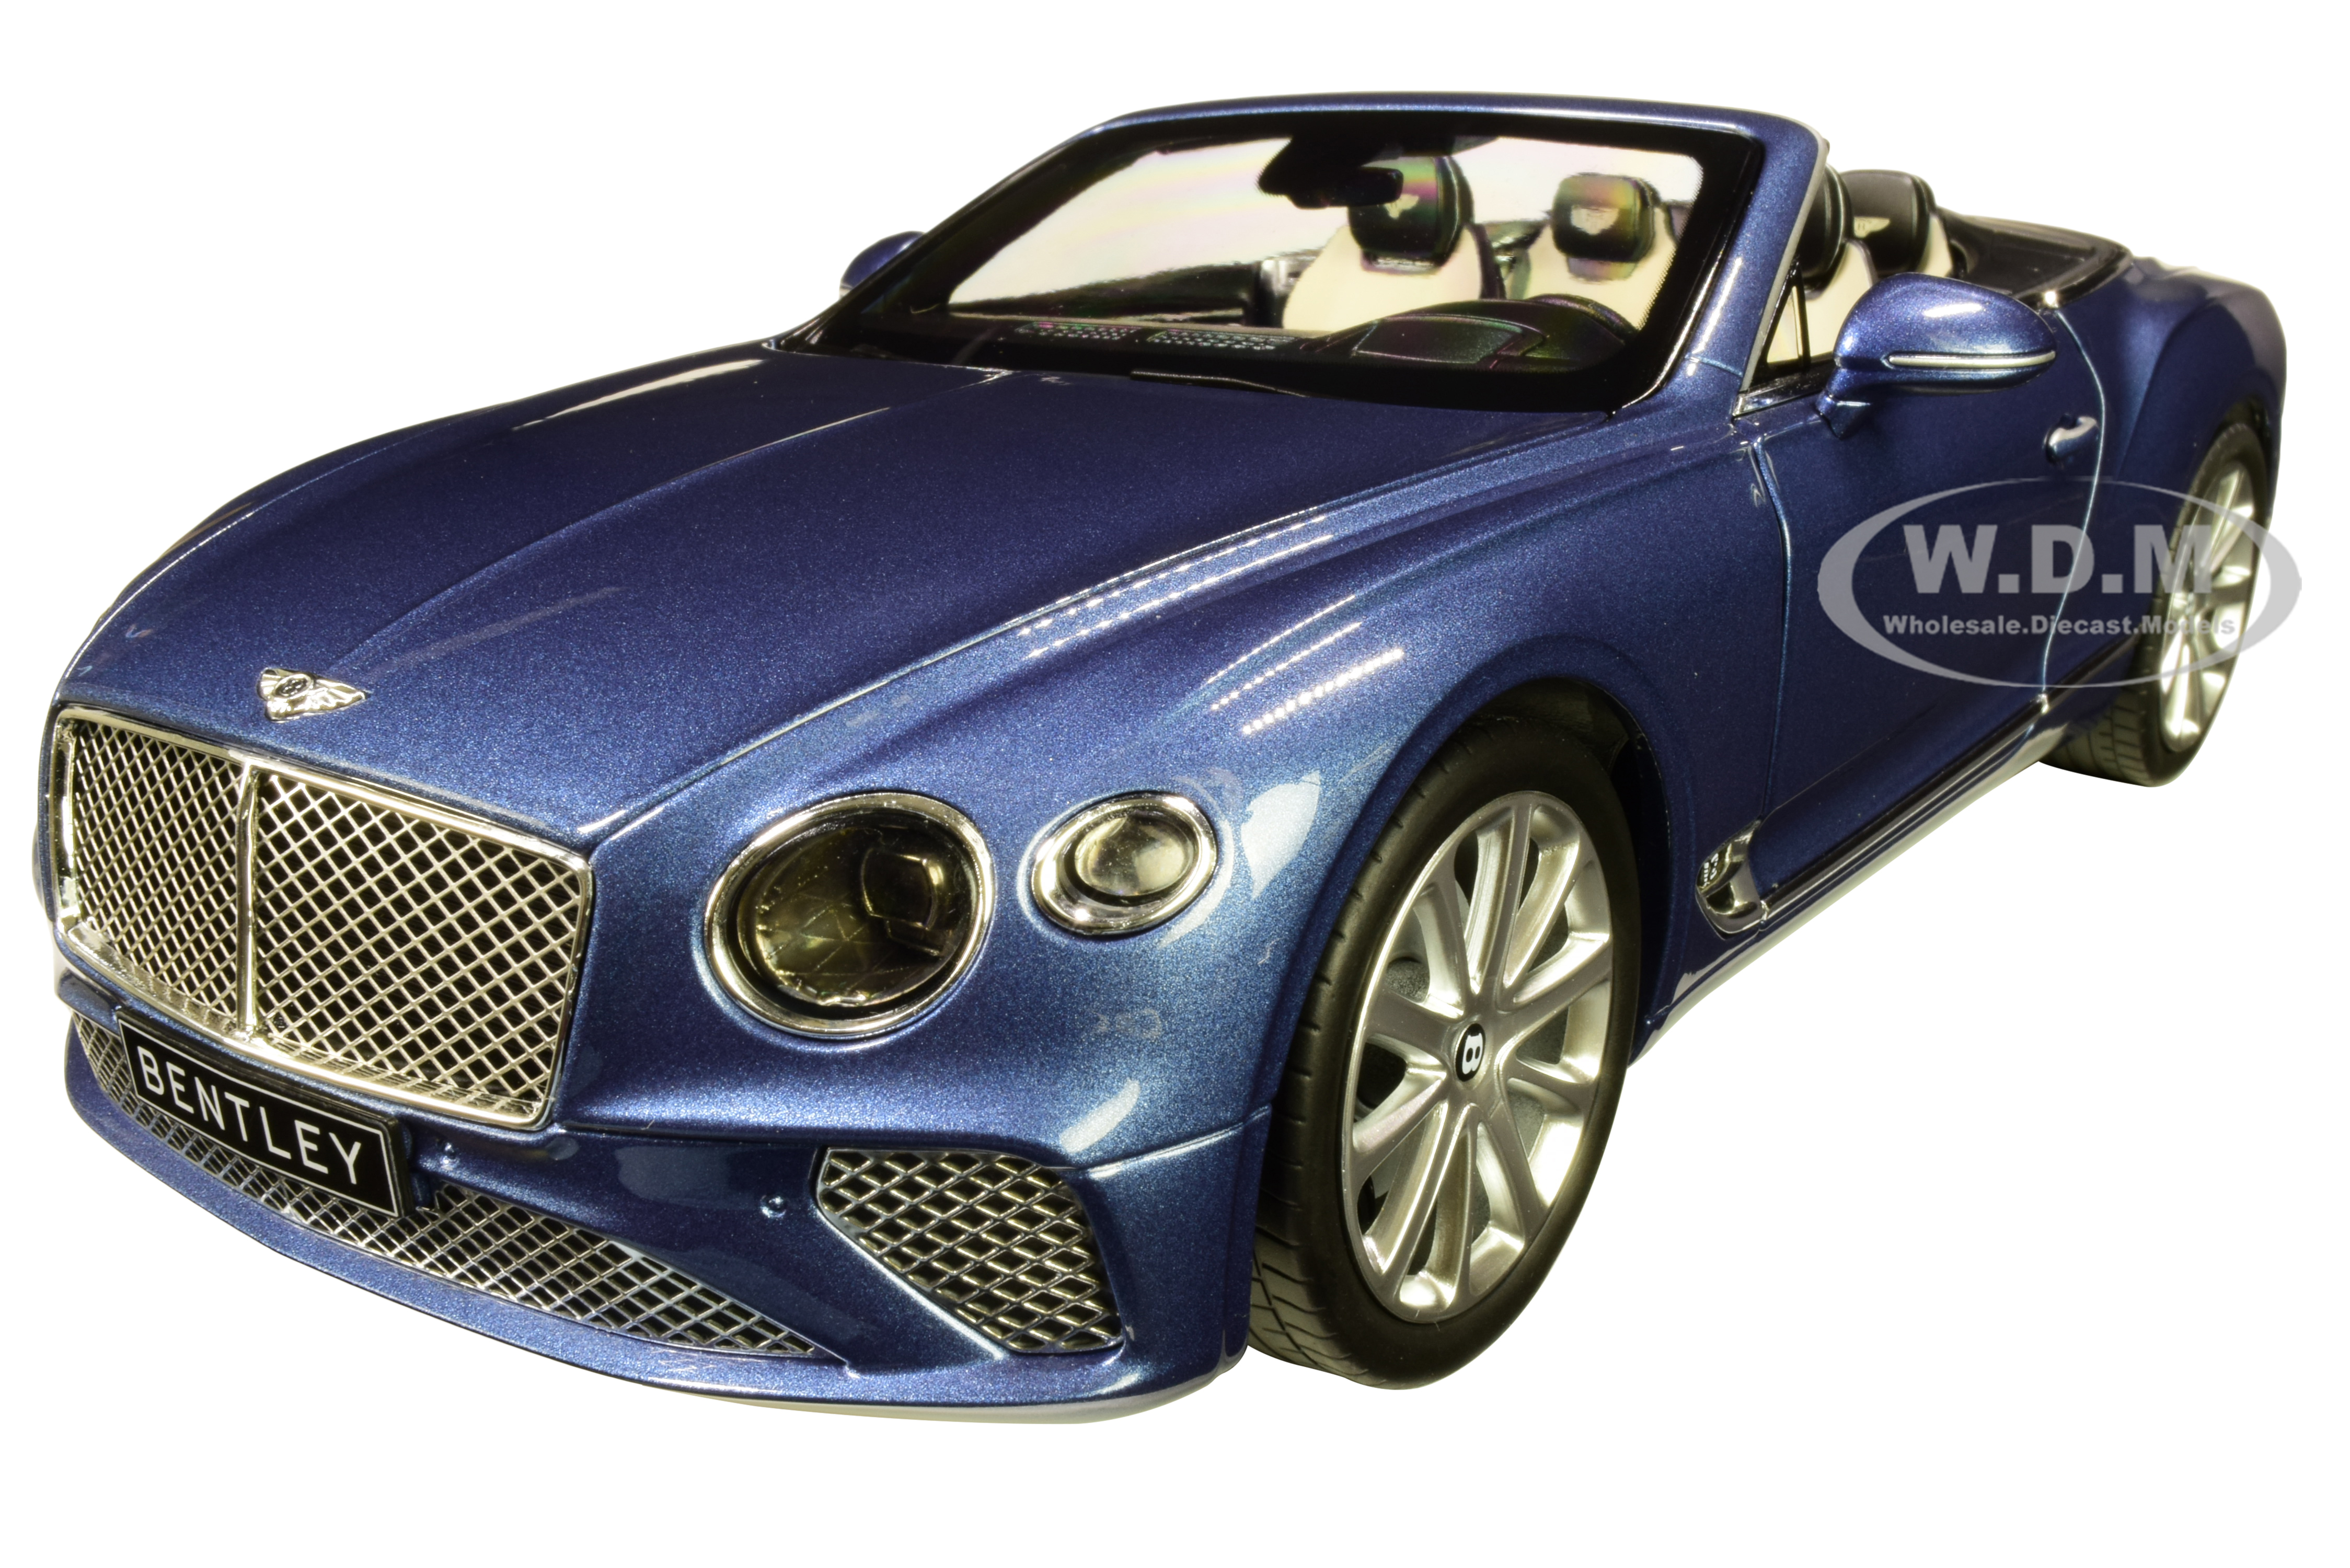 2019 Bentley Continental Gt Convertible Blue Crystal Metallic 1/18 Diecast Model Car By Norev